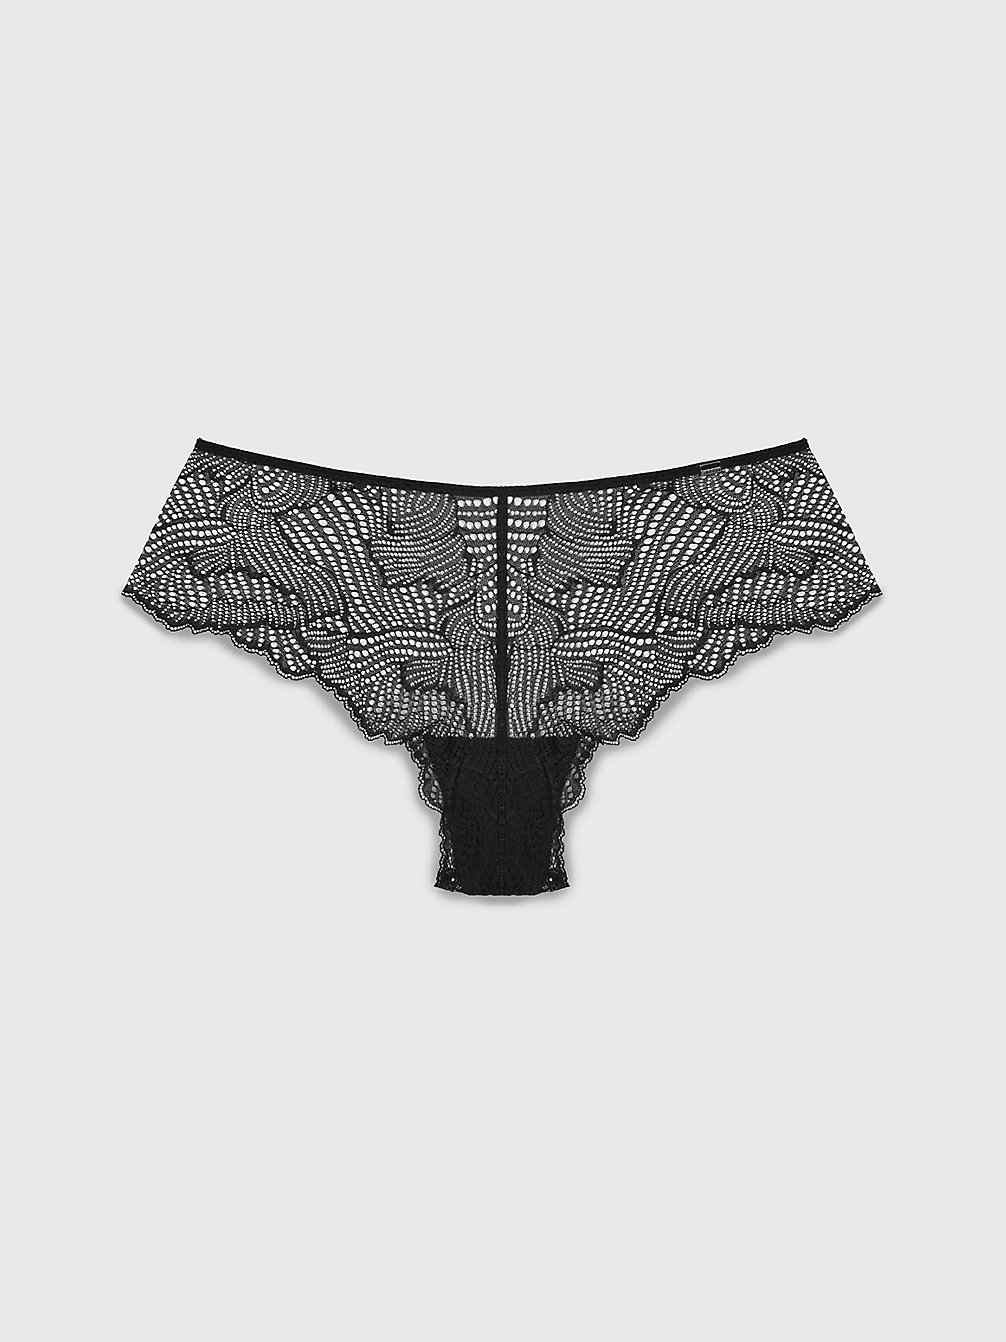 BLACK Hipster Panty - Geo Lace undefined women Calvin Klein